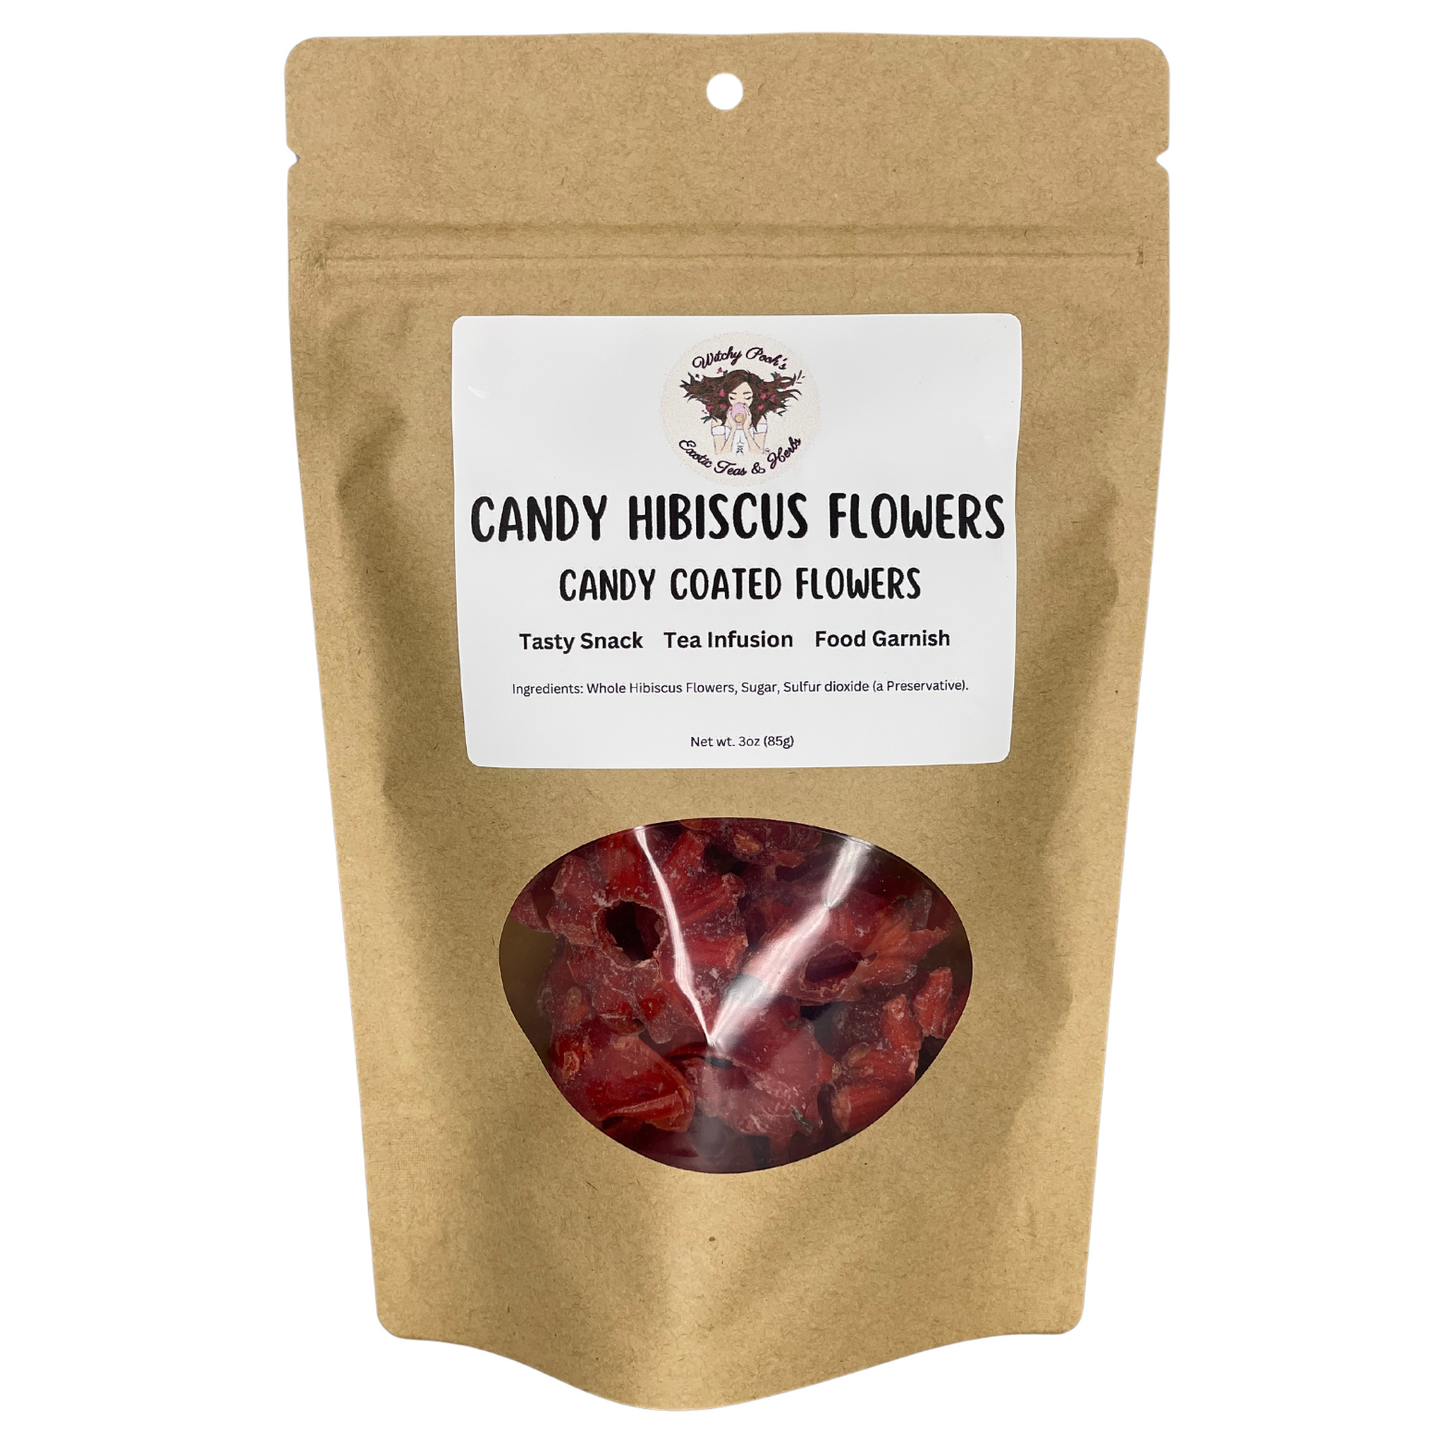 Witchy Pooh's Candy Hibiscus Flowers, Sweet Candy Coated Whole Bright Red Hibiscus Flowers, Addicting Snack!